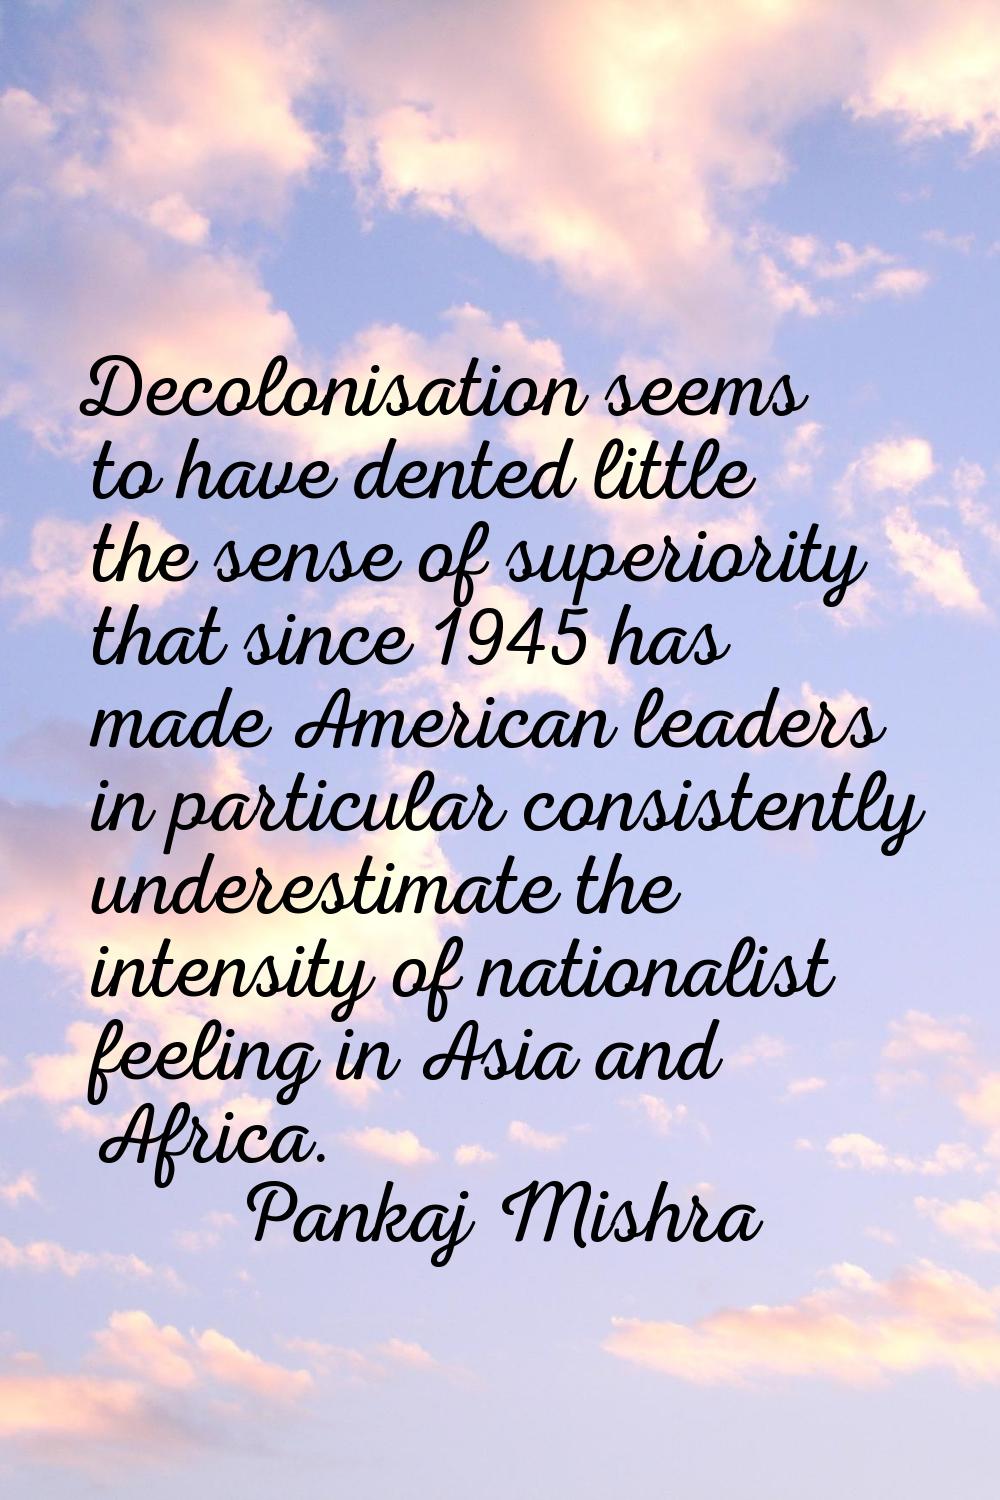 Decolonisation seems to have dented little the sense of superiority that since 1945 has made Americ